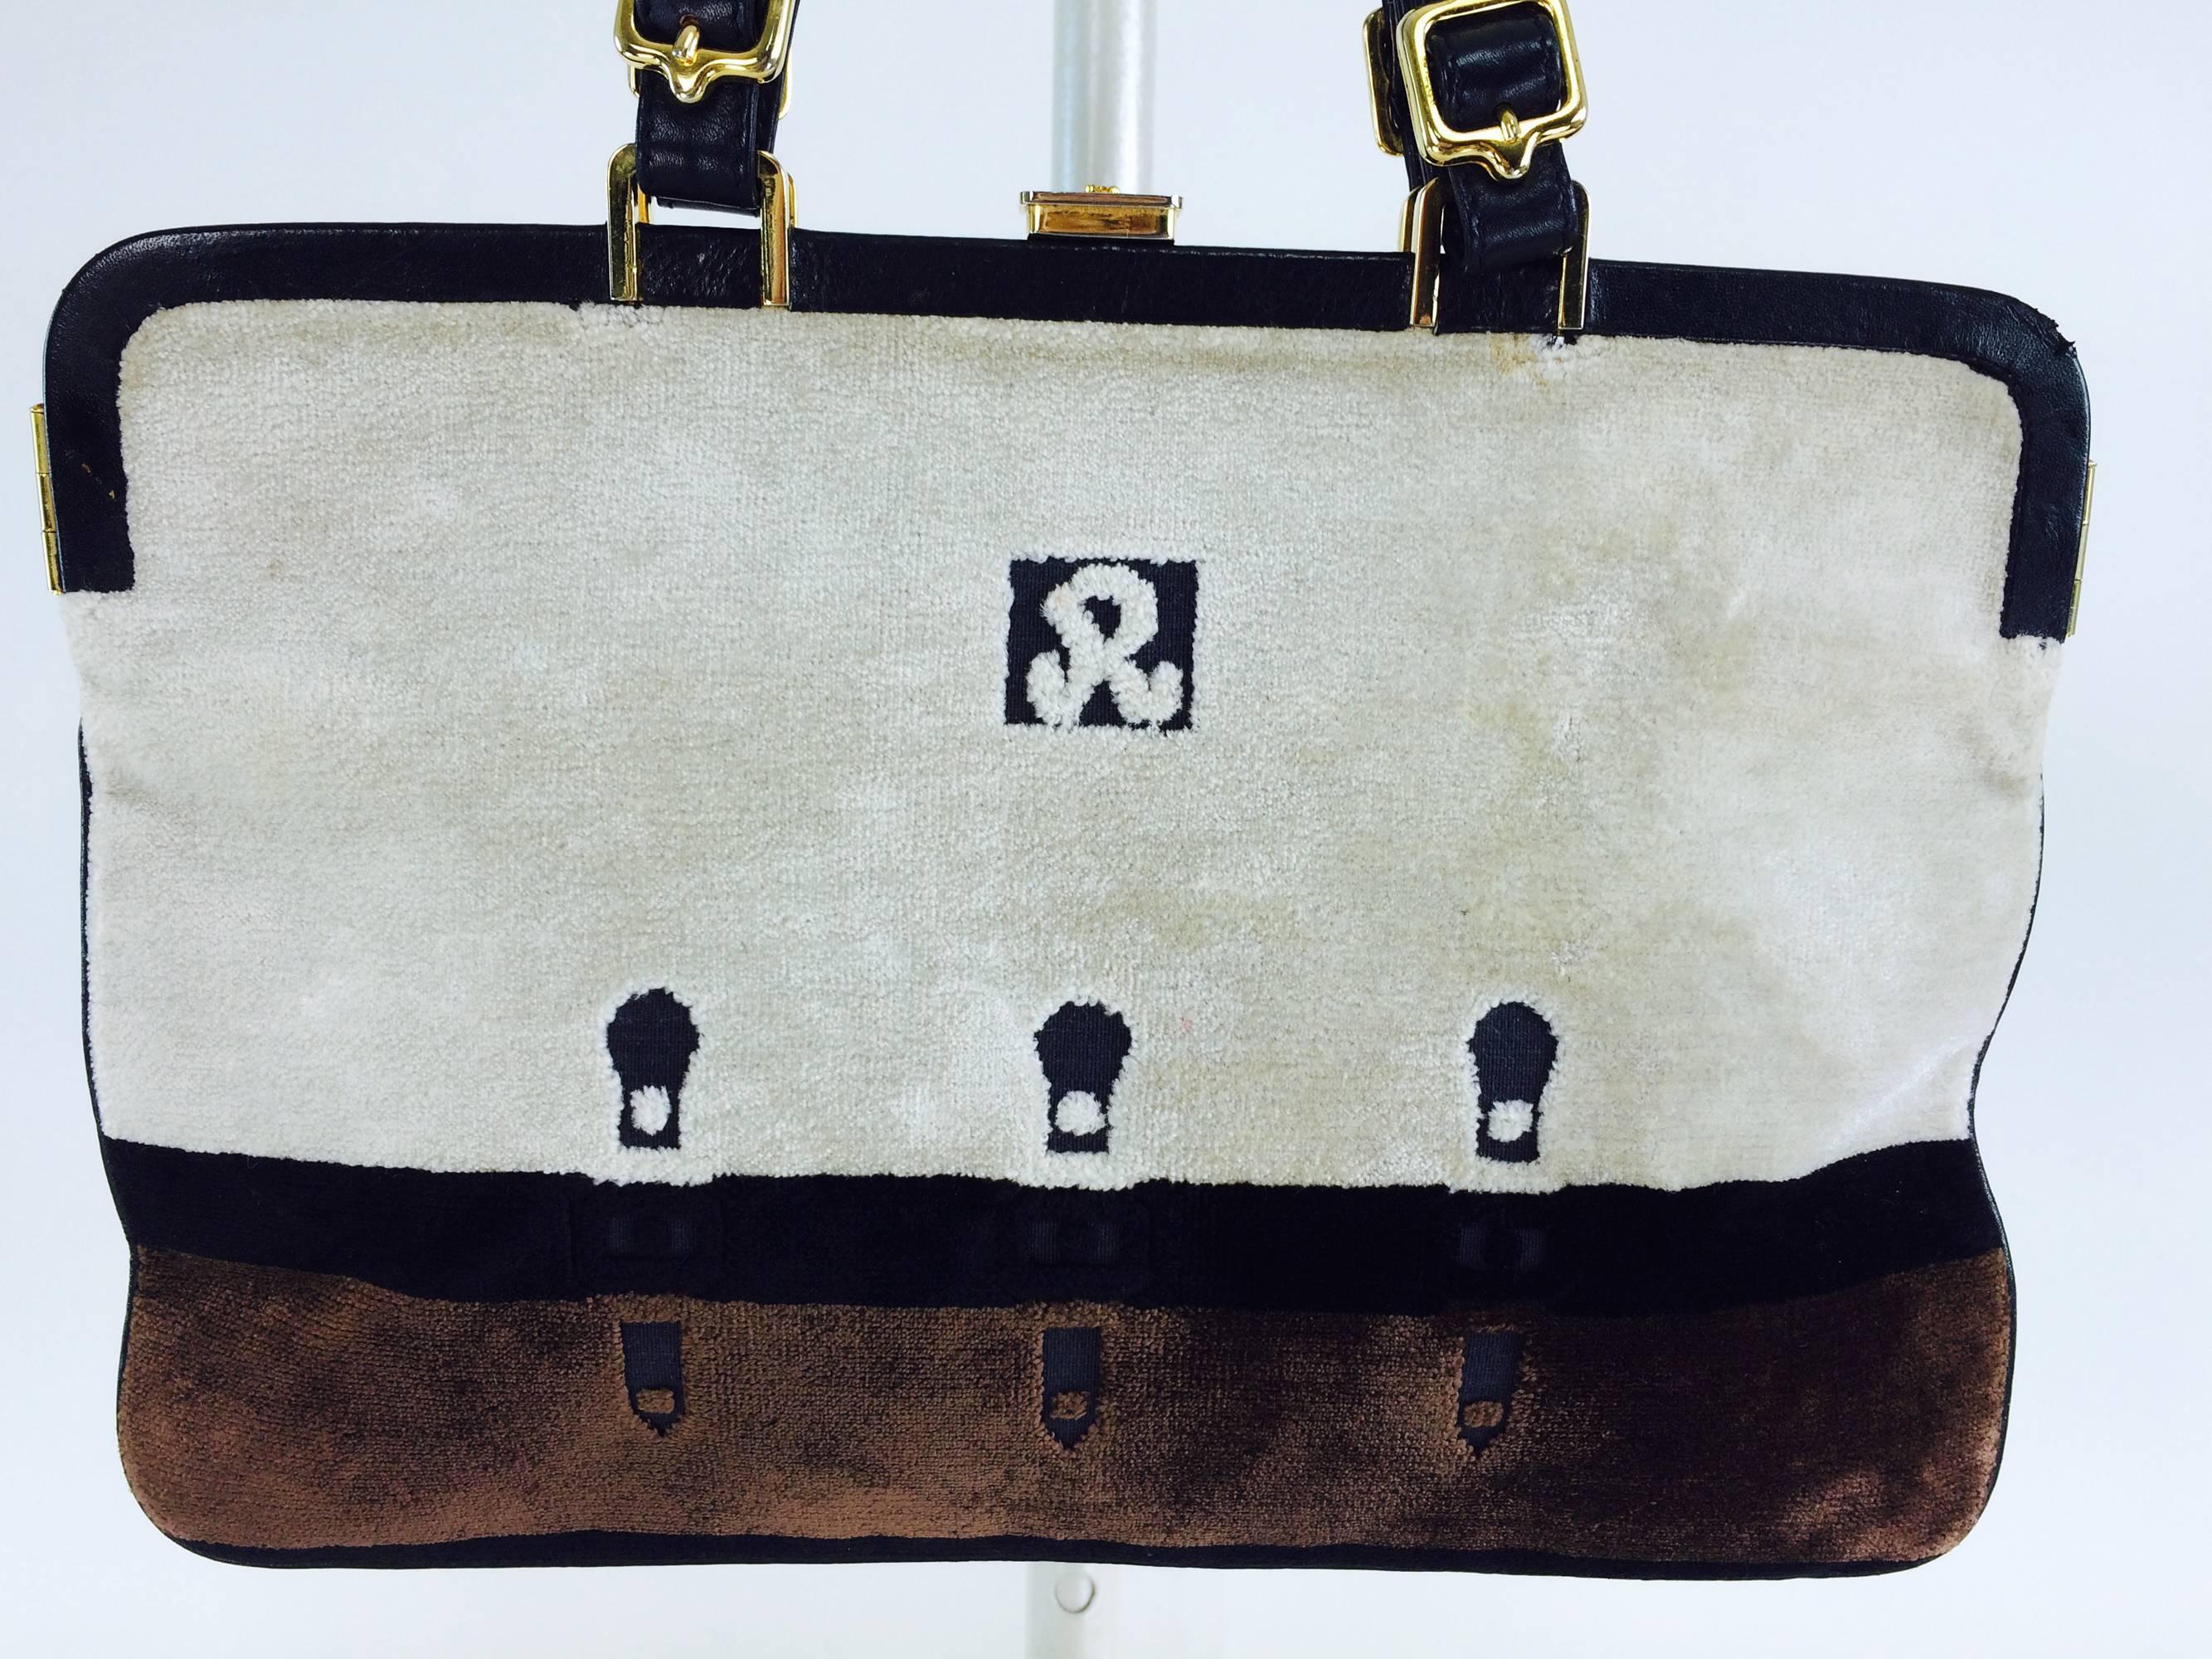 Roberta di Camerino cream, black & chocolate brown frame handbag 1970s...Cream, black and chocolate brown handbag with double leather handles that have gold buckles, the bag opens with a gold logo clasp, the frame is trimmed in black leather...The